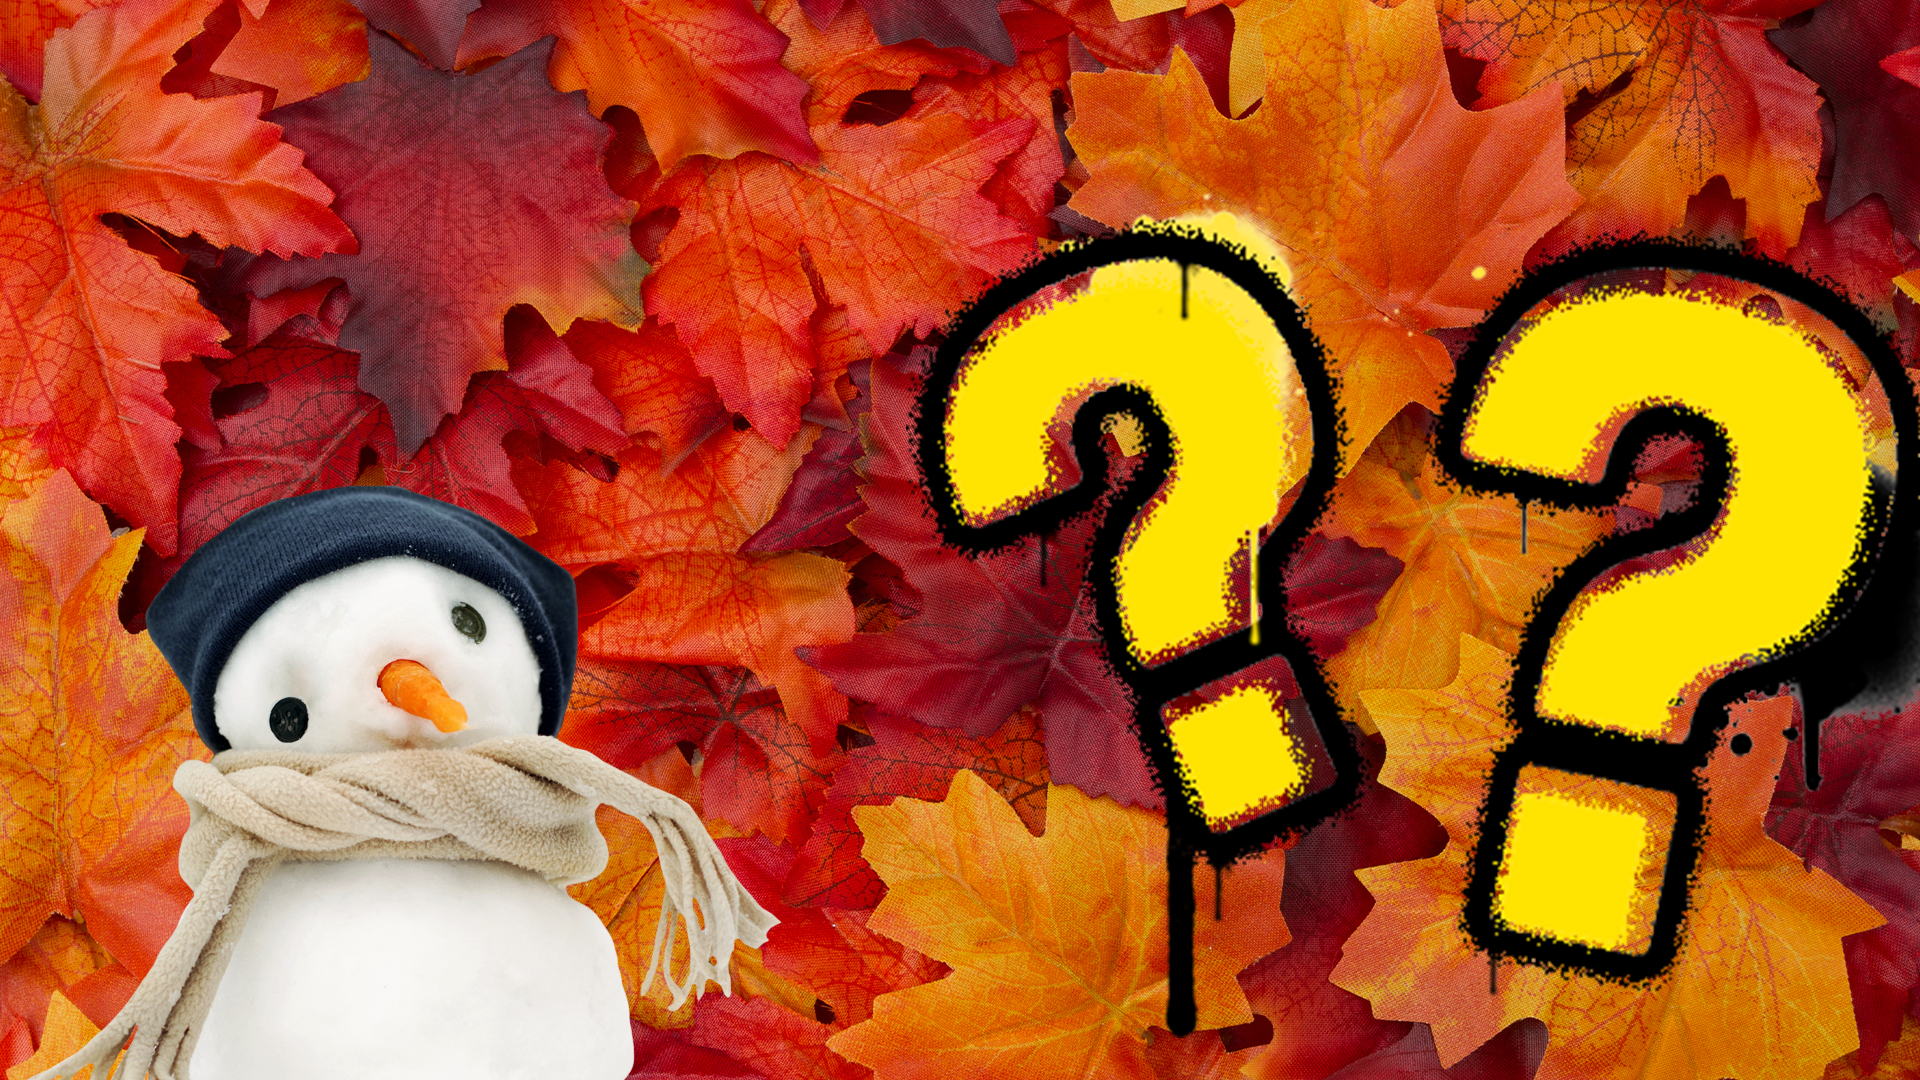 Snowman and question marks on autumn leaf background